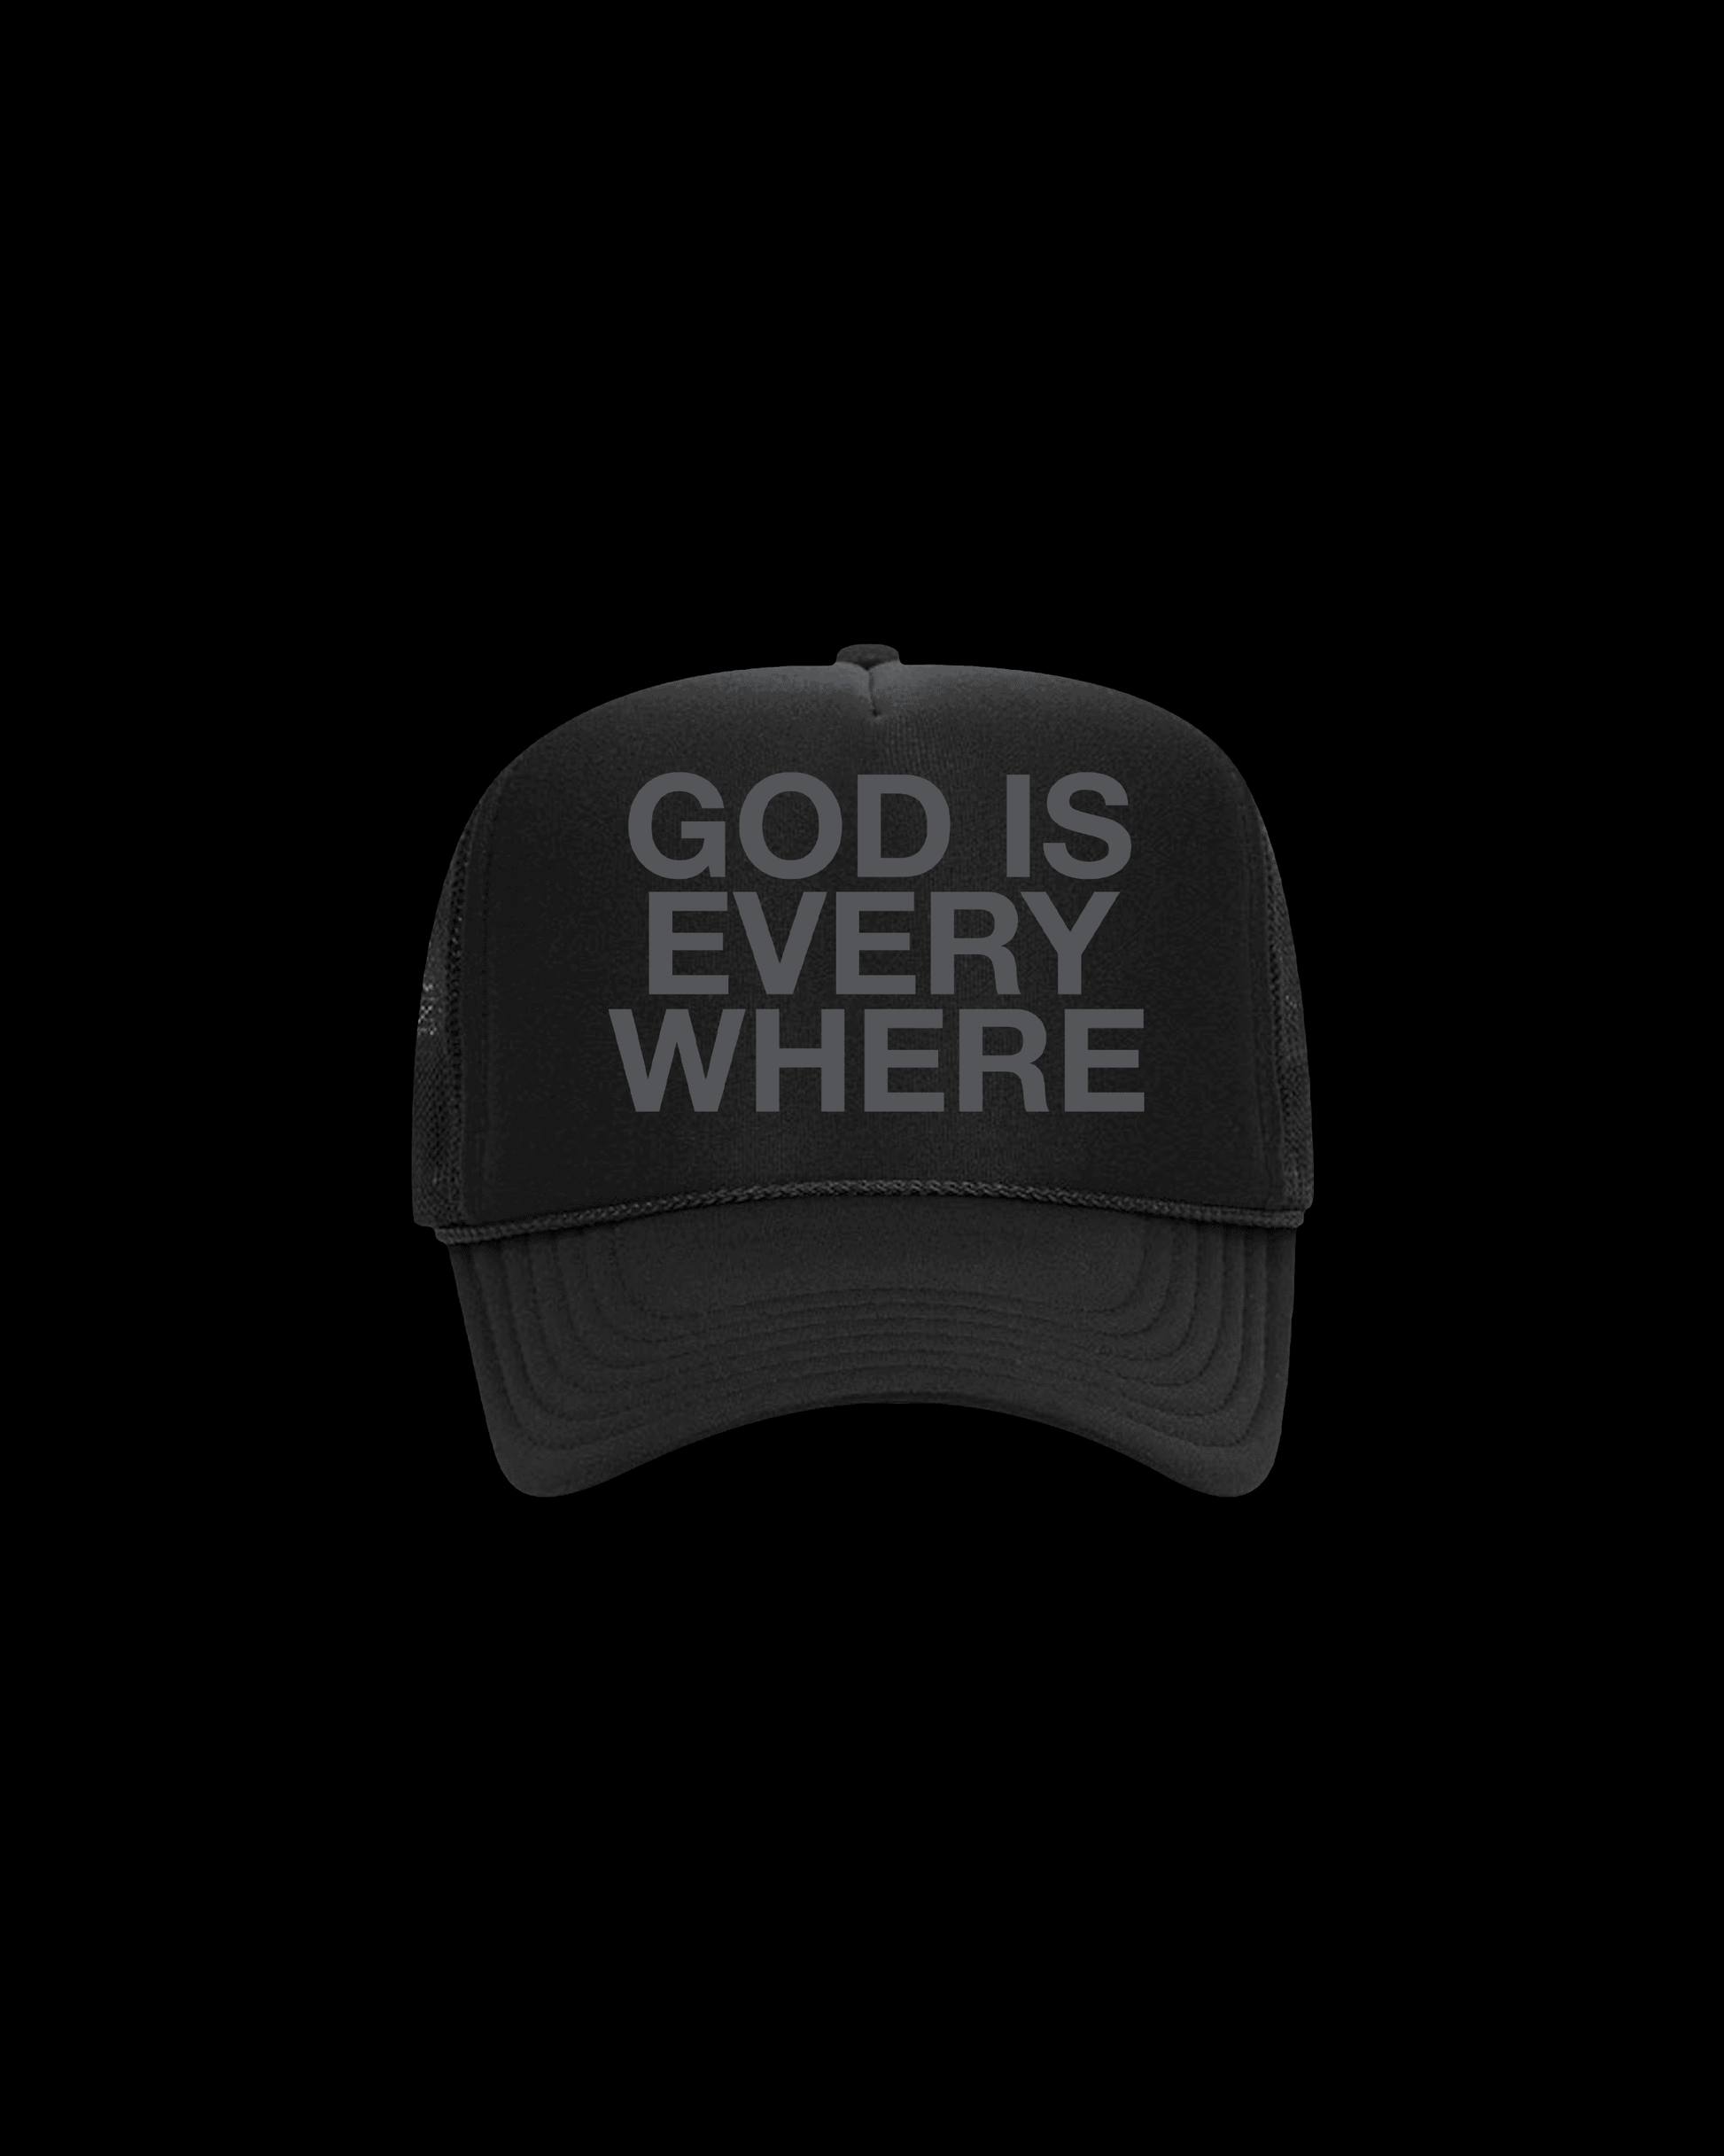 God Is Everywhere black colored christian trucker hat by NHIM Apparel christian clothing brand